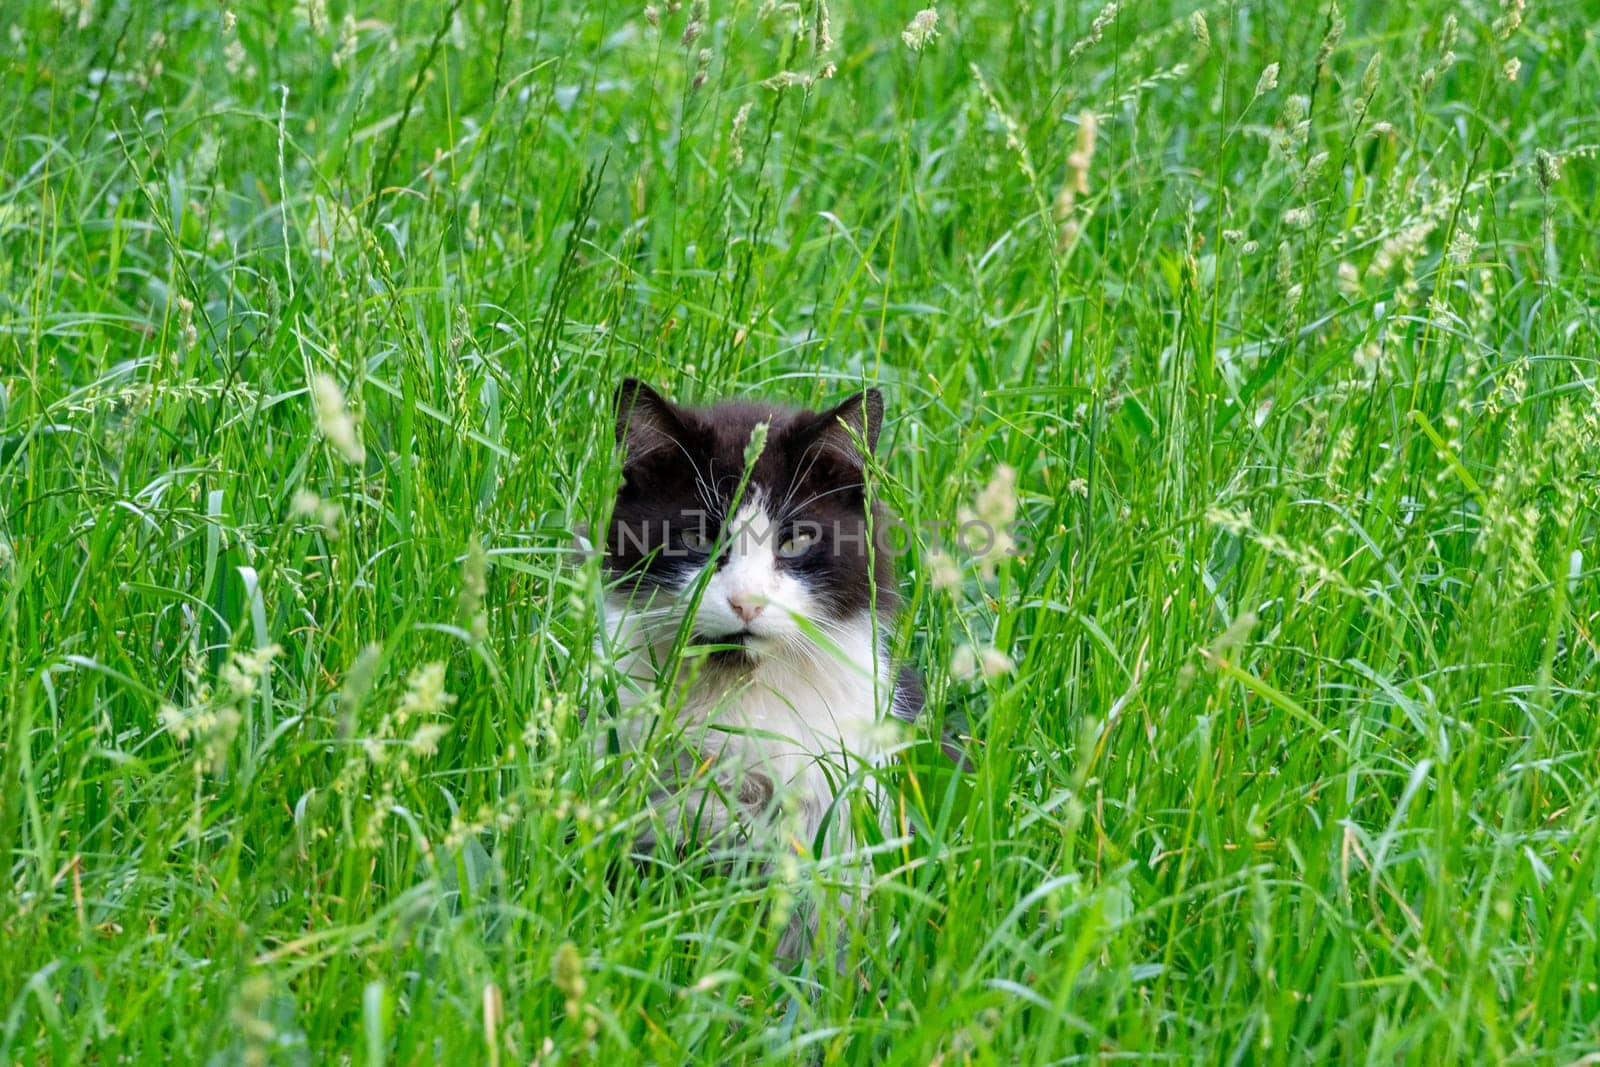 A black and white cat sits in tall green grass.